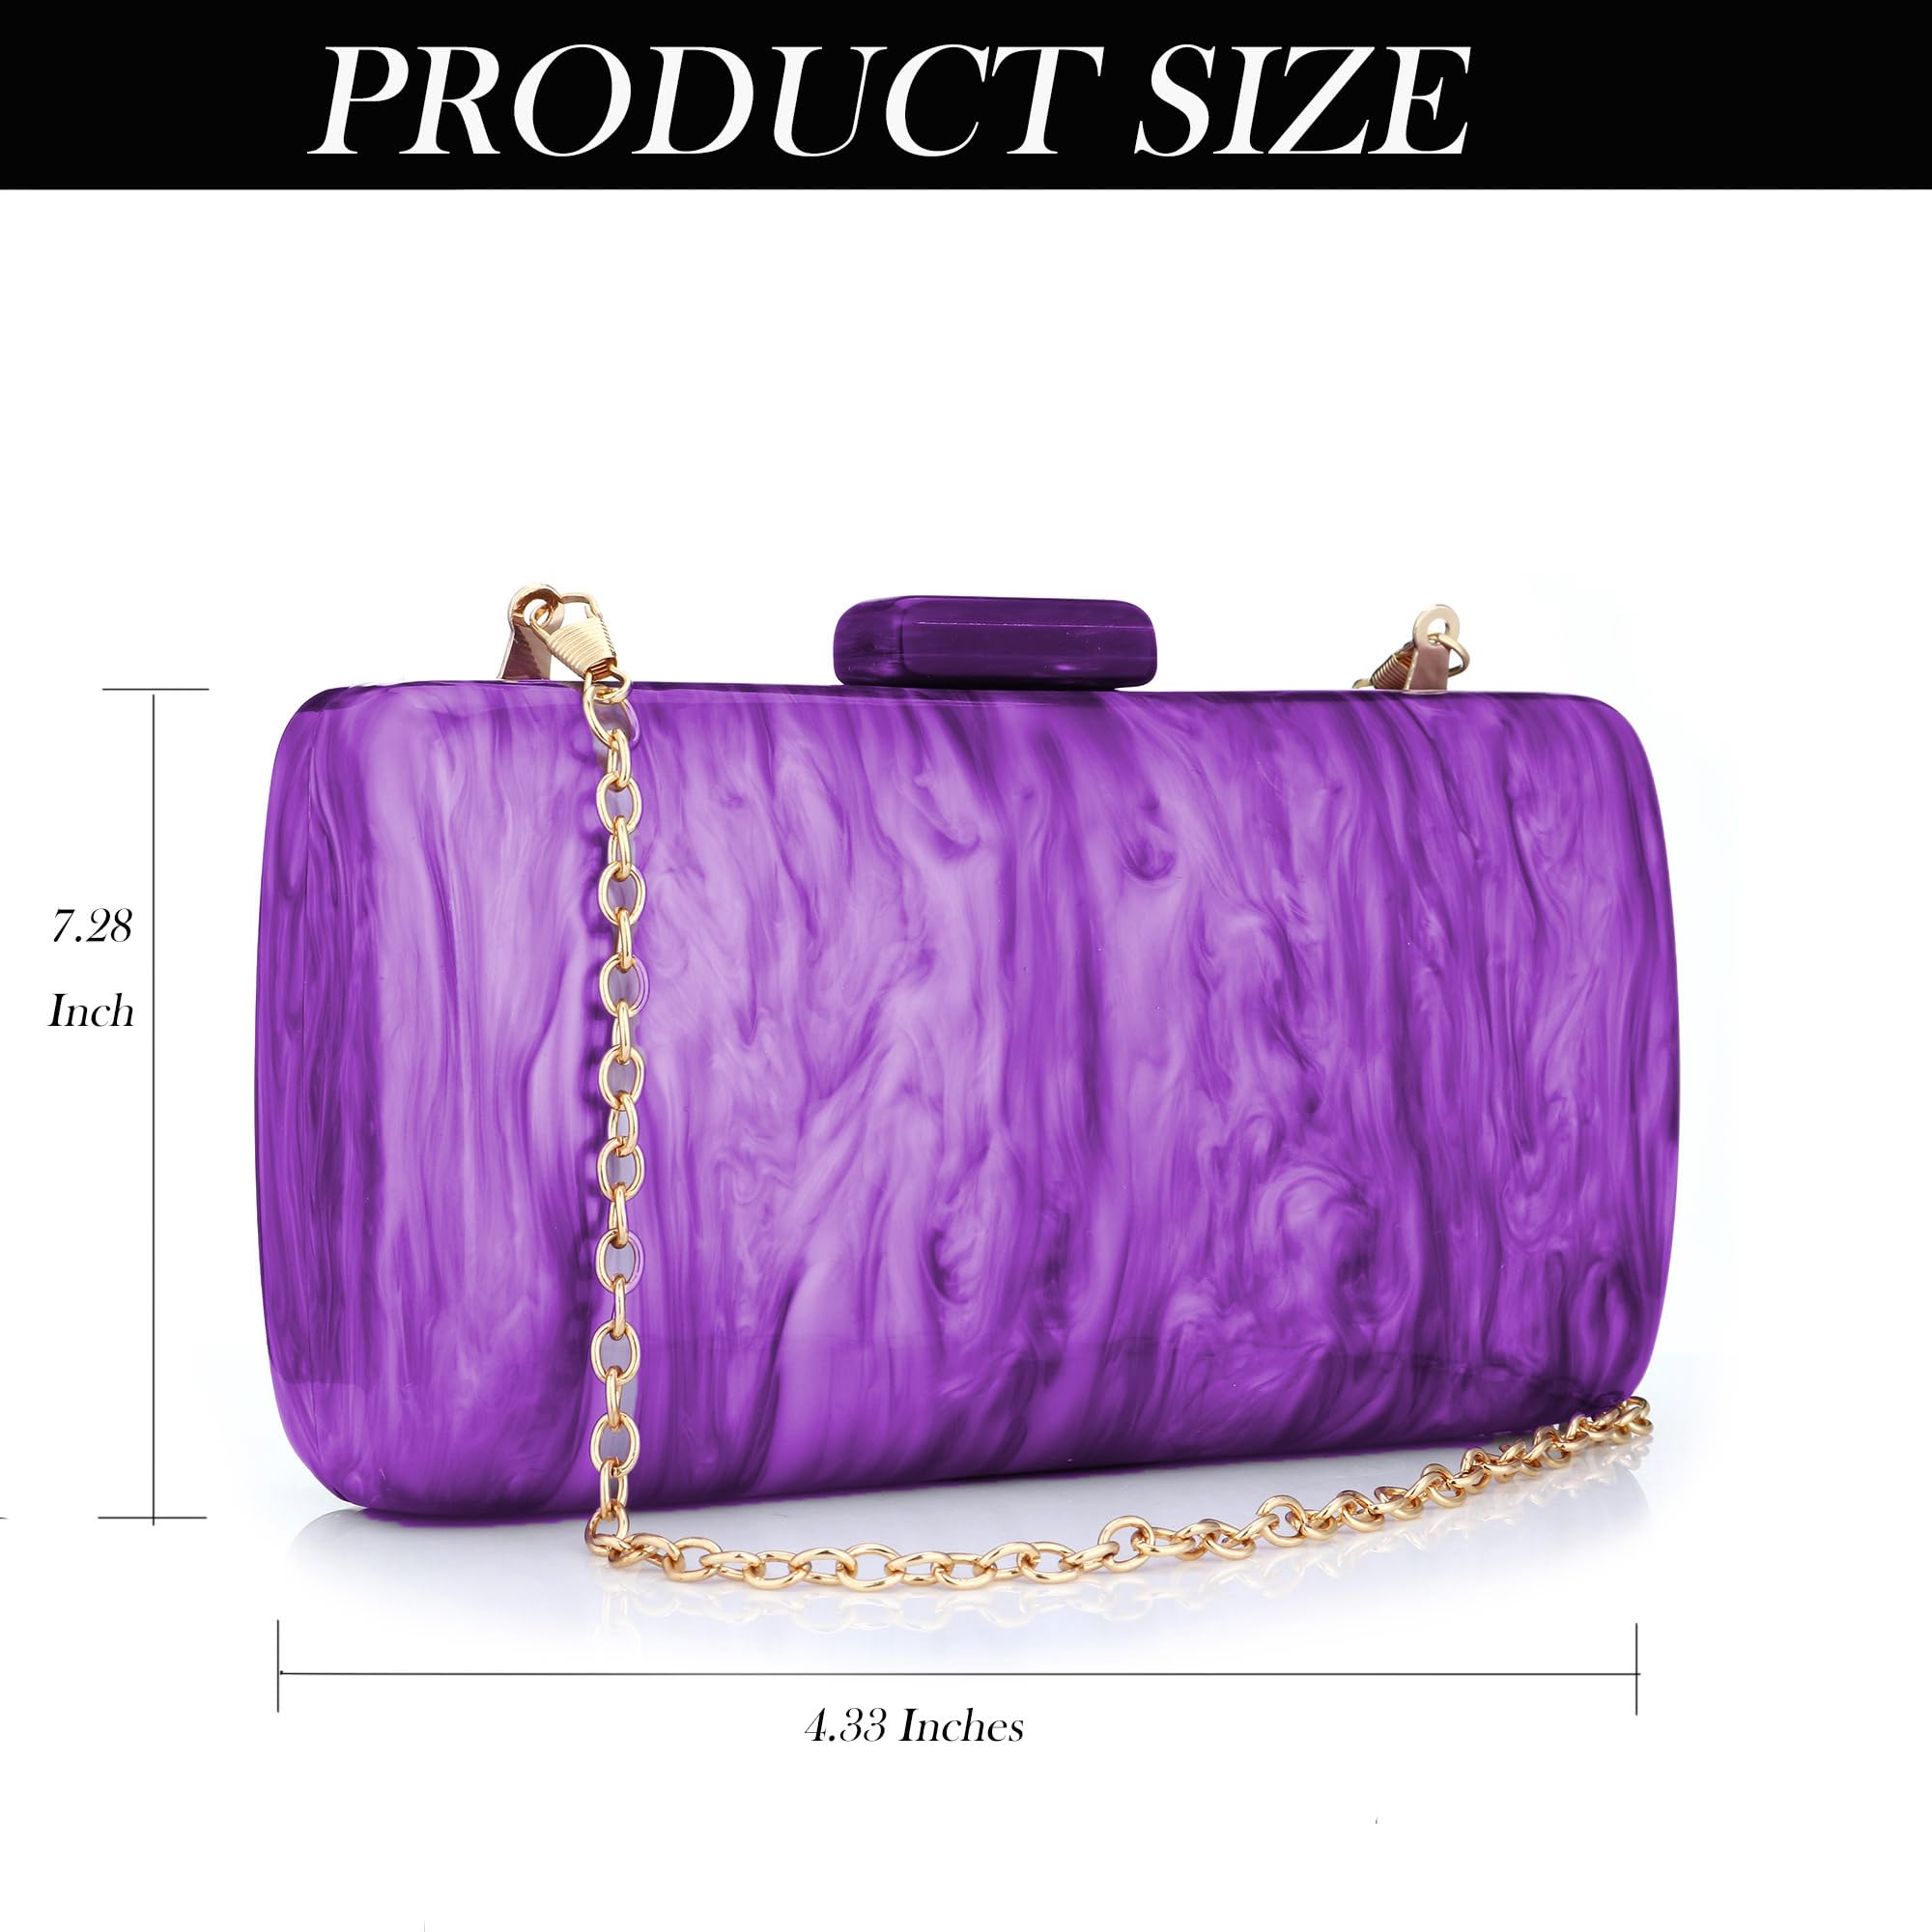 Buric Clutch Purses for Women Elegant Evening Bag Clutch Crossbody Bag with Detachable Chain for Prom/Party/Present/Wedding